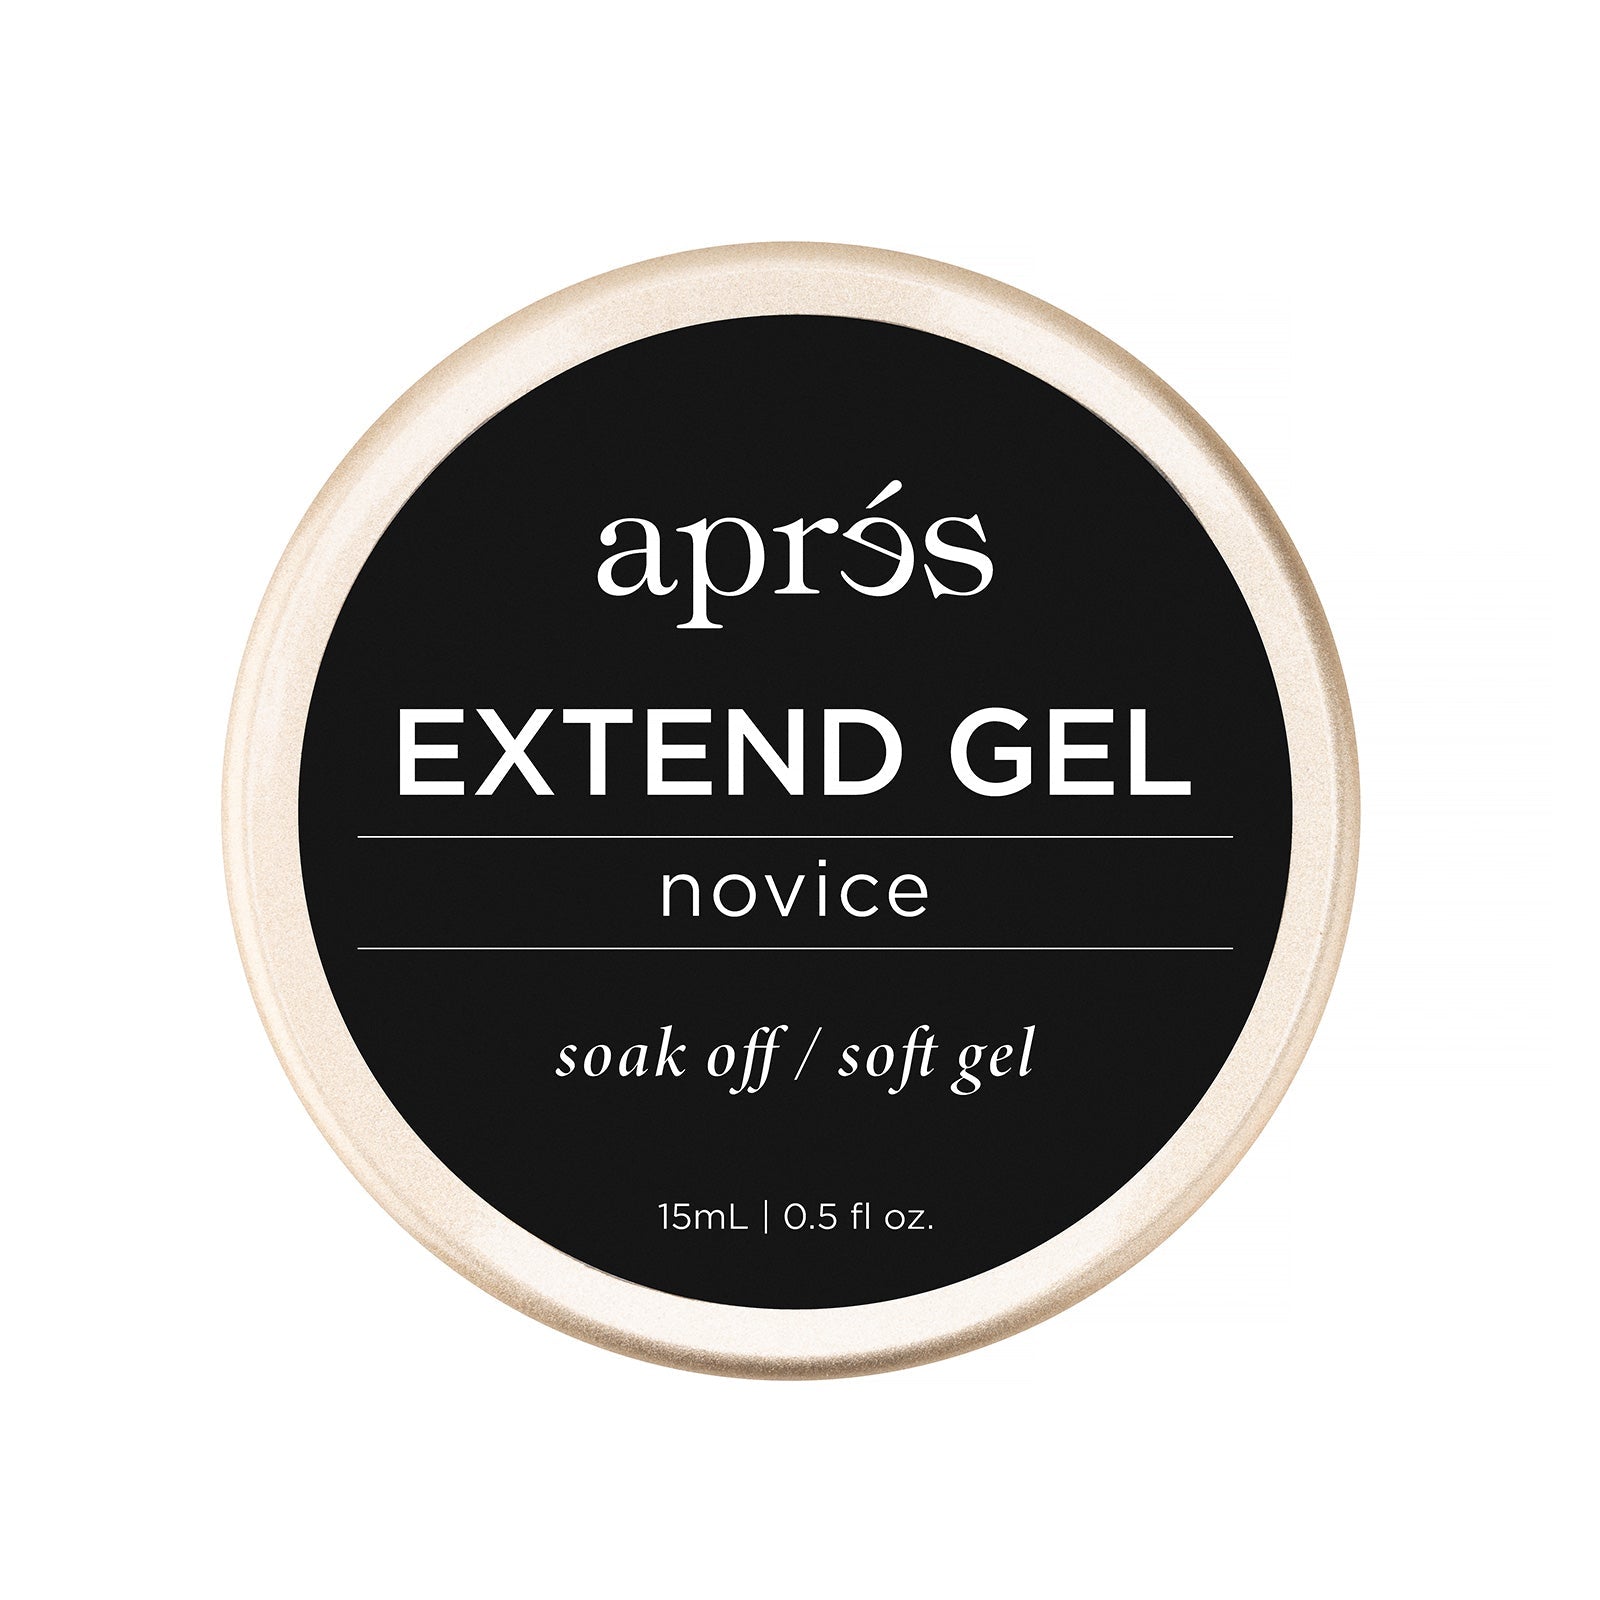 Top view of Extend Gel Novice by Apres